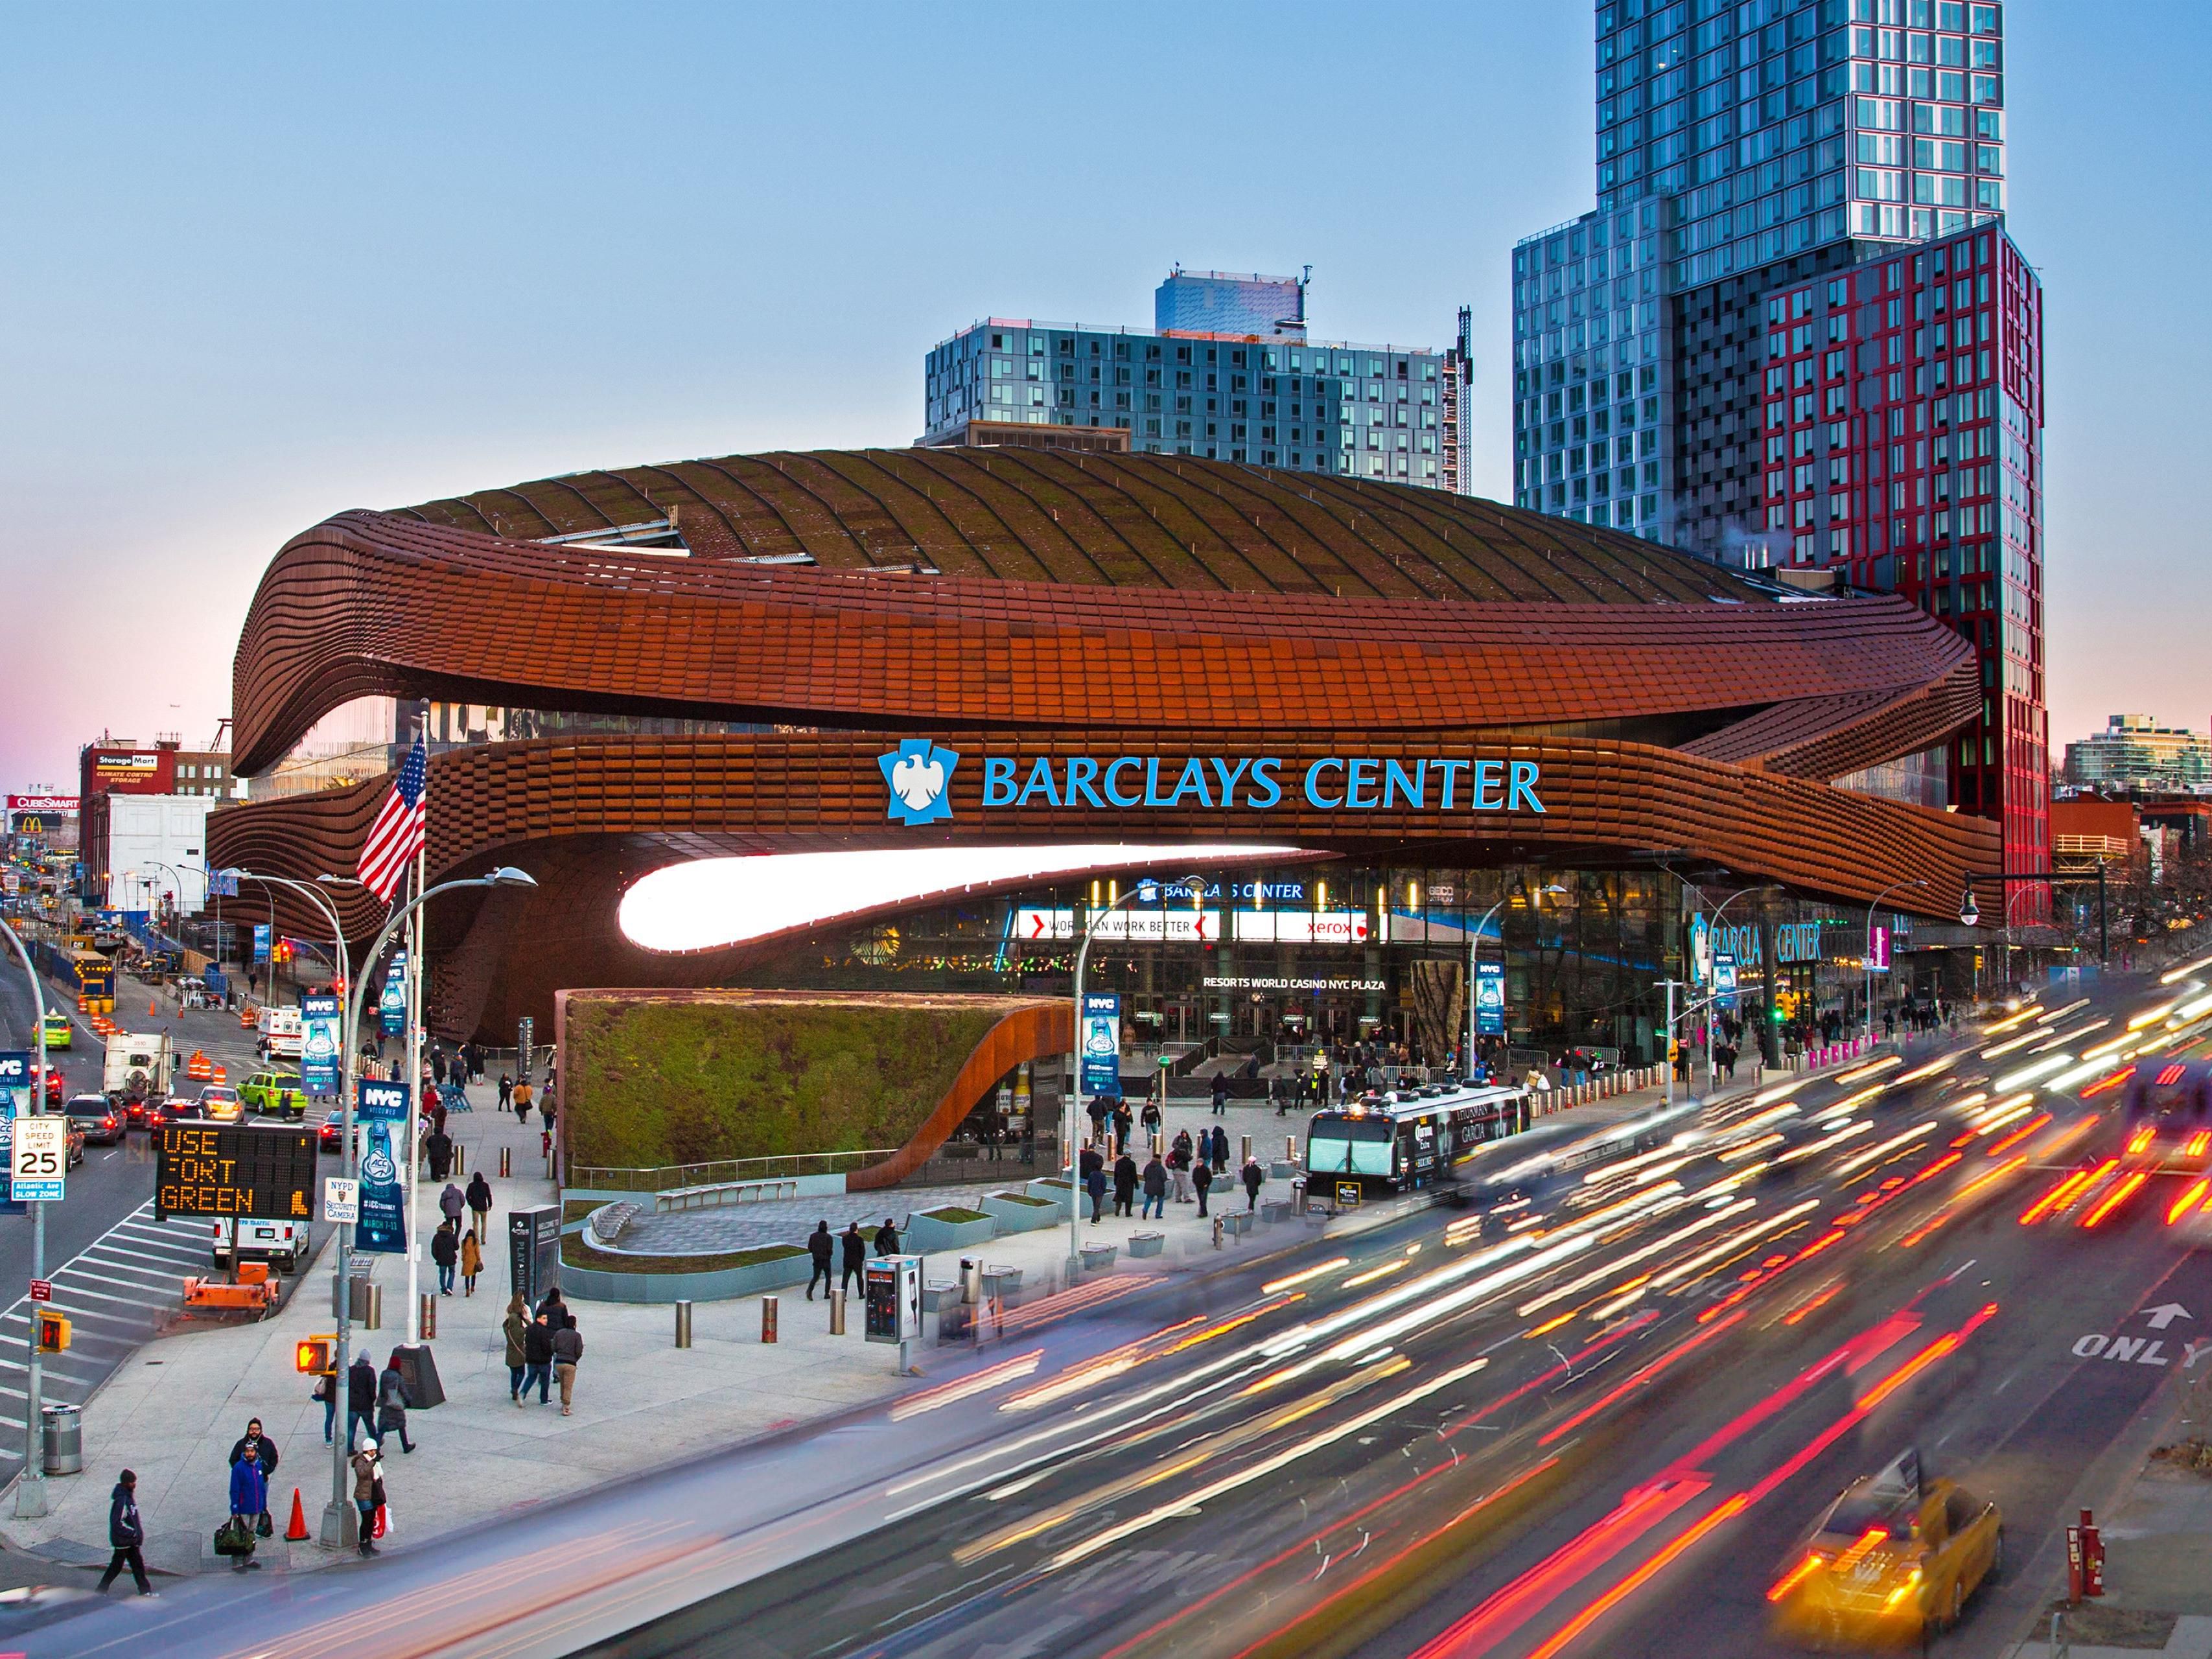 Our hotel is 1/2 mile from the Barclays Center where you can watch a sporting event or attend a concert. 